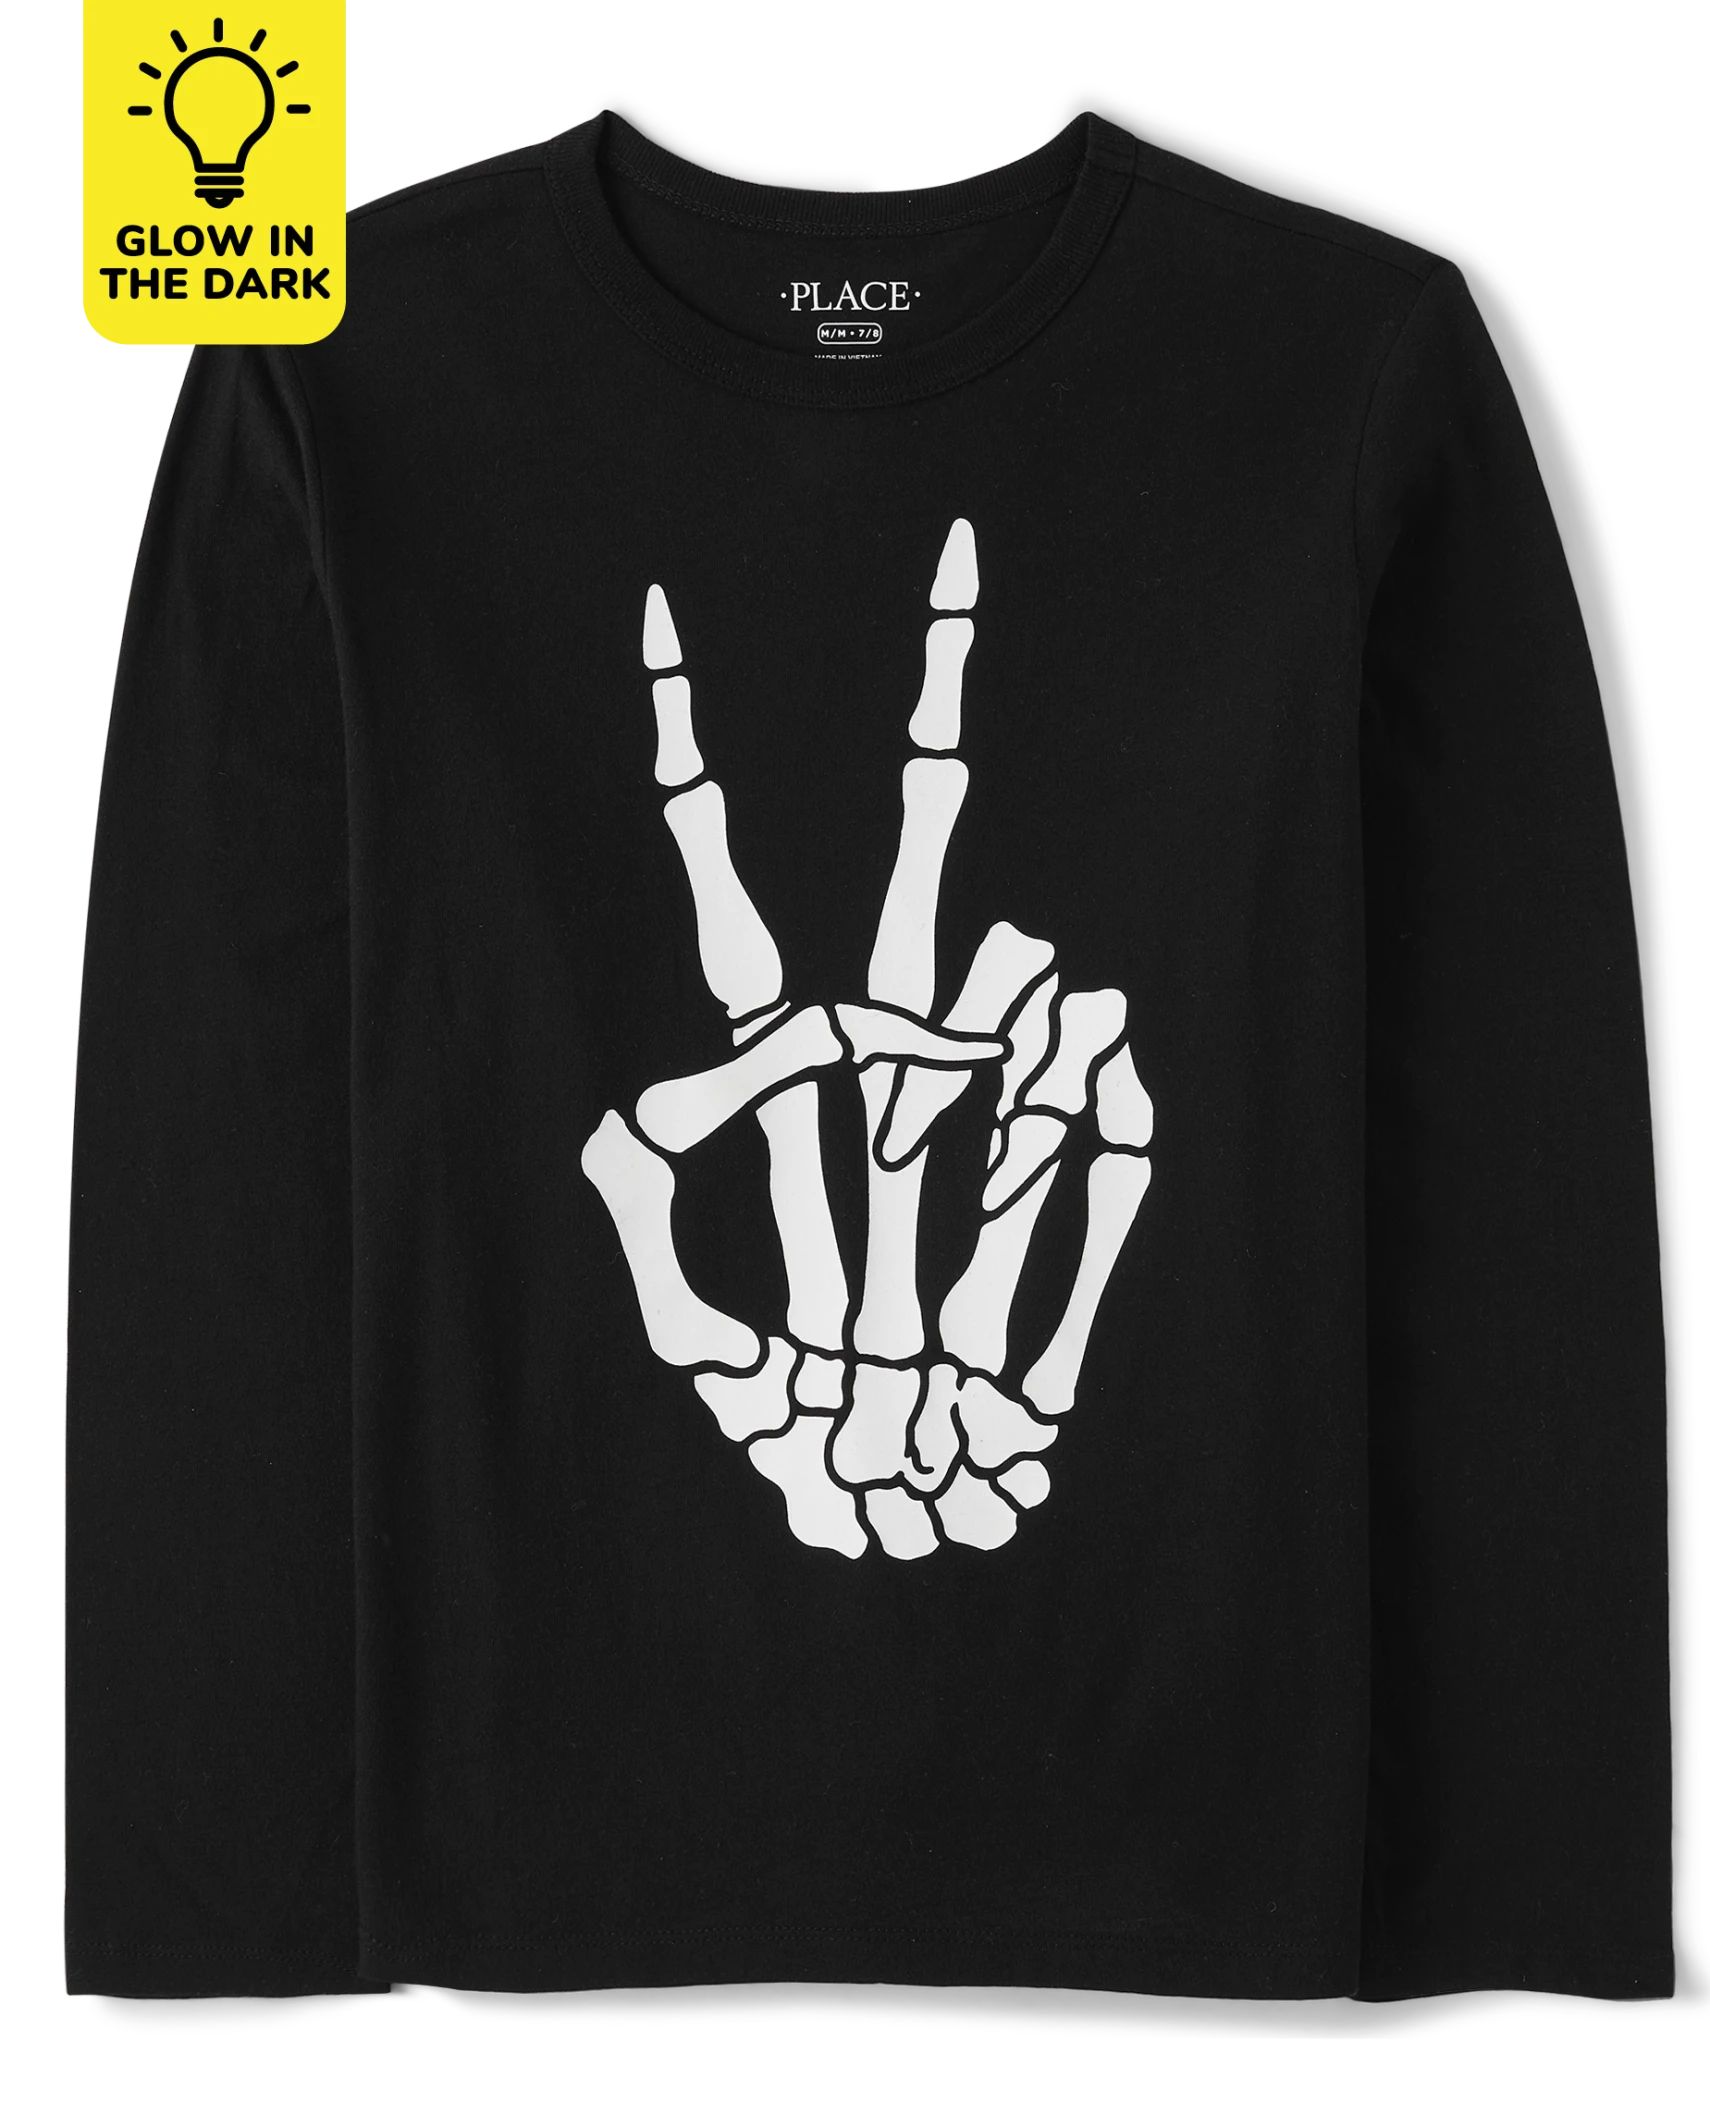 Unisex Kids Glow Skeleton Peace Sign Graphic Tee - black | The Children's Place